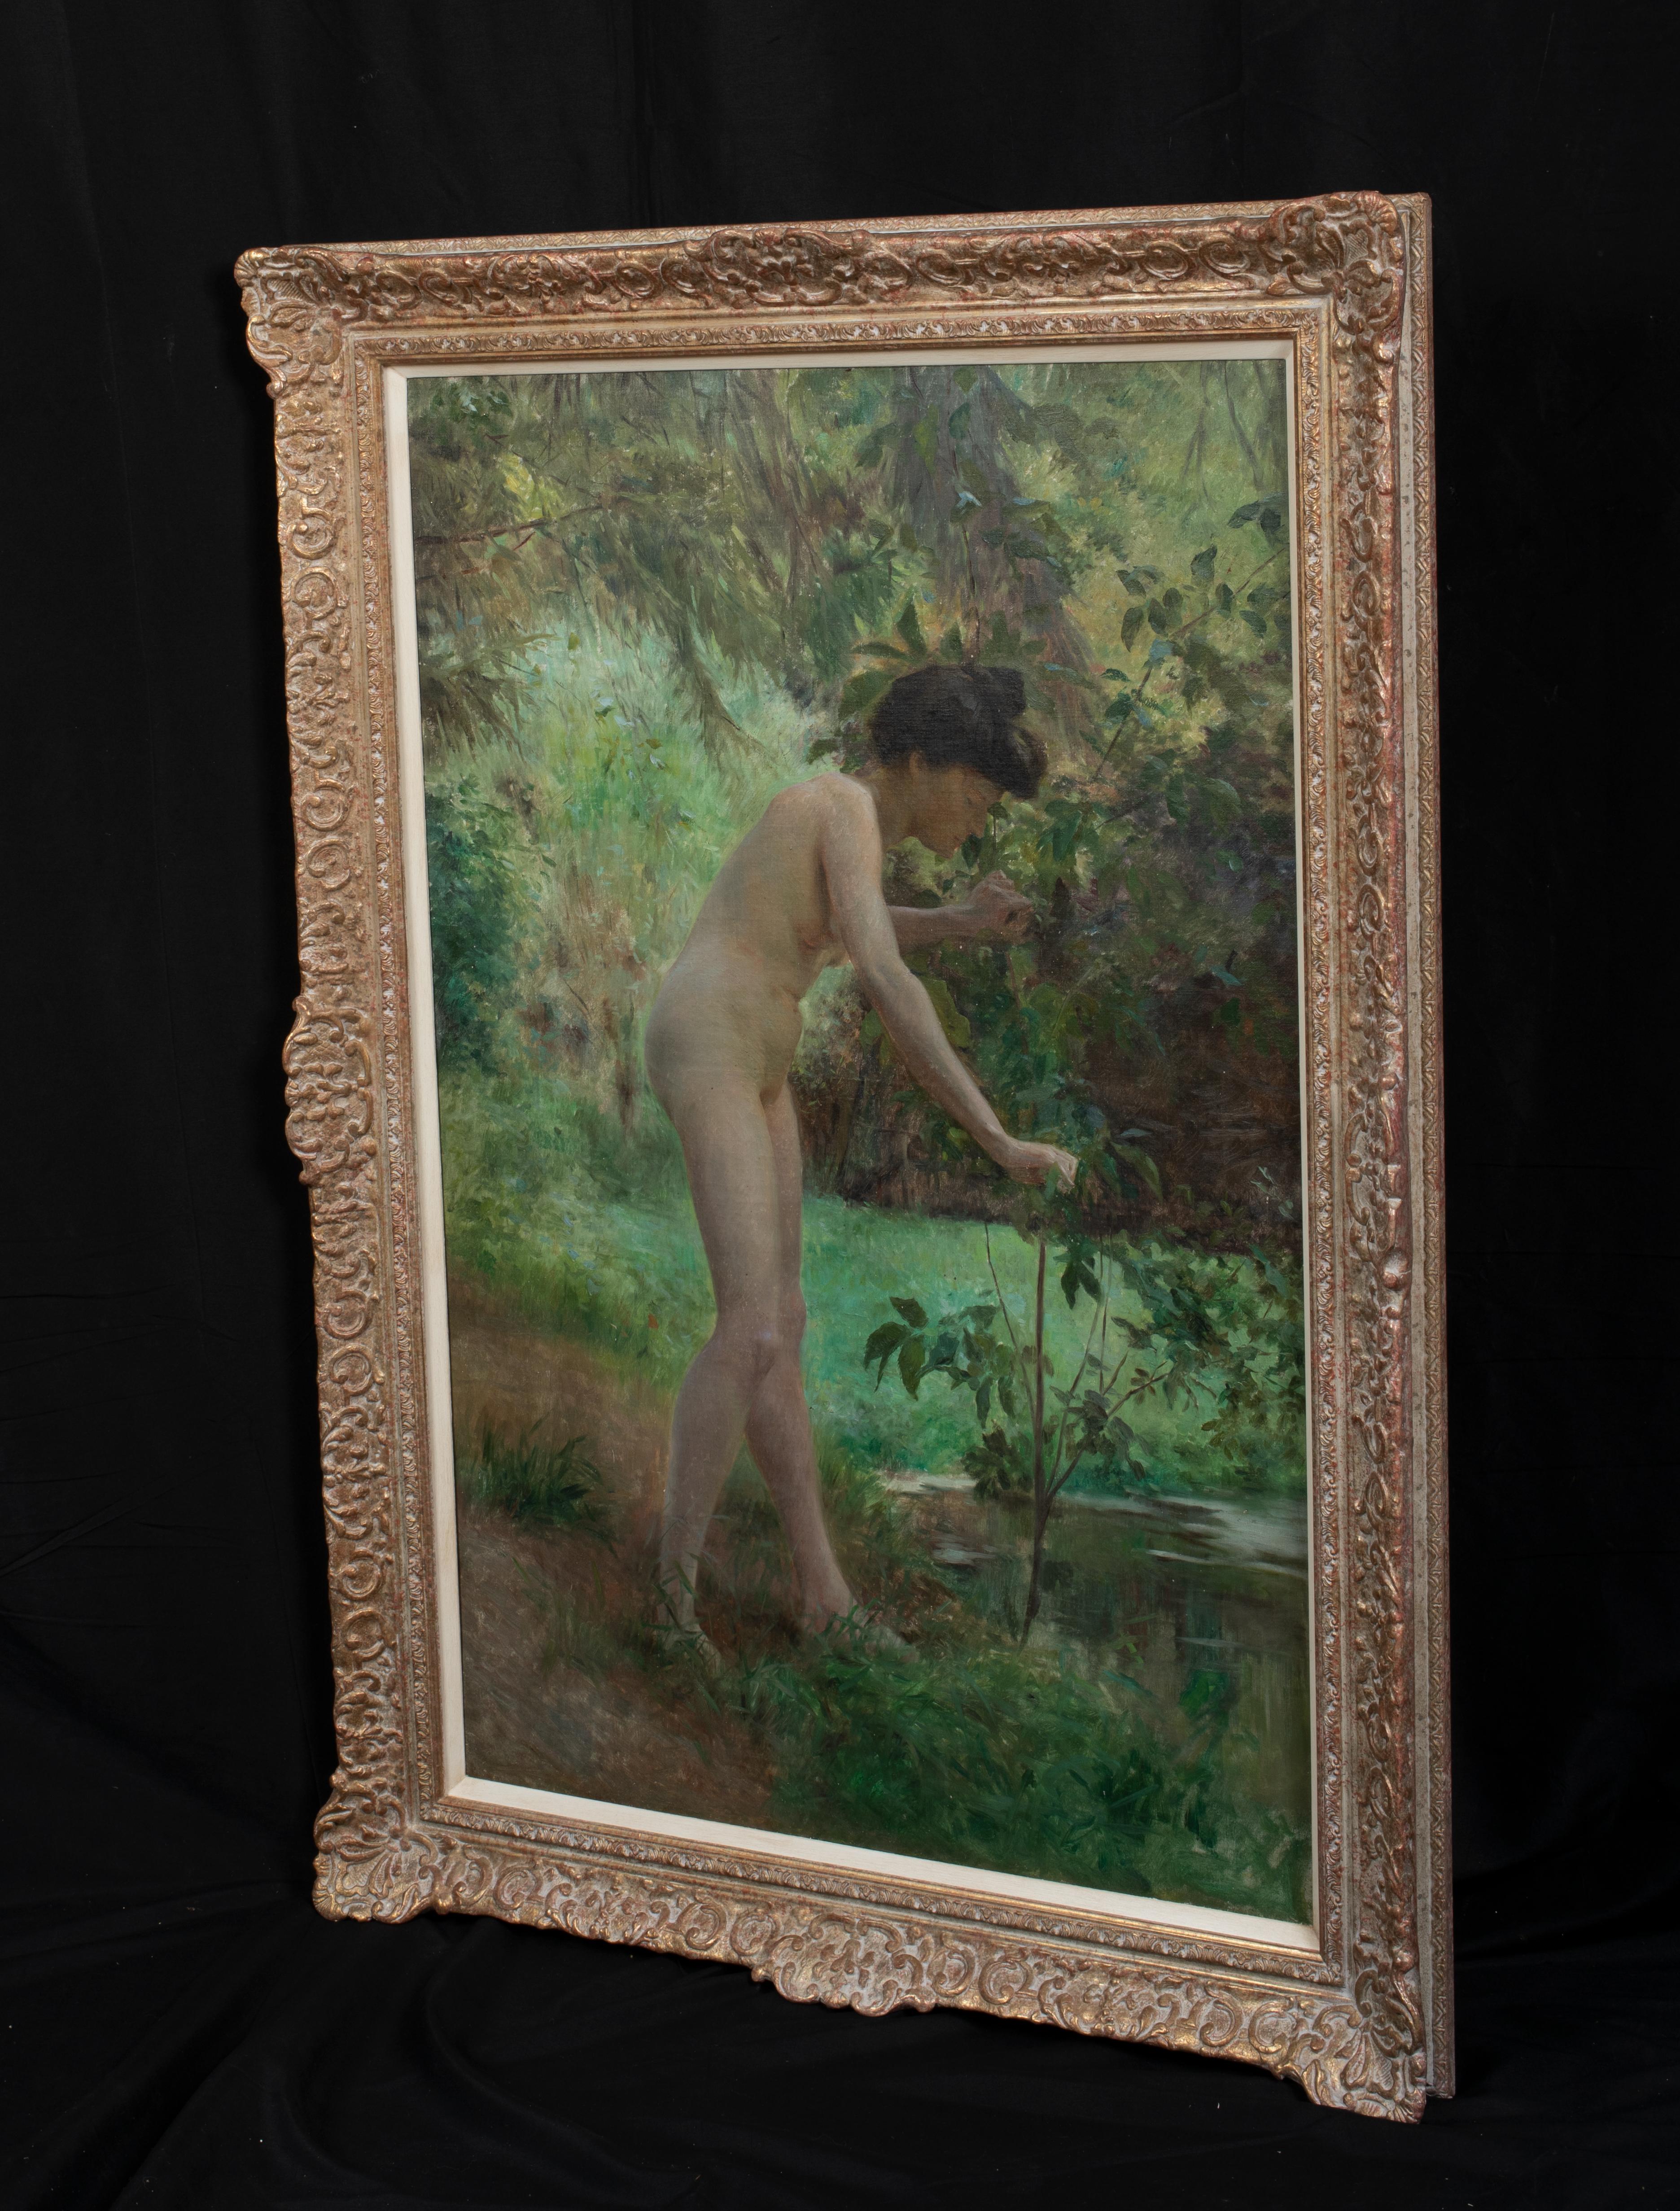 Portrait Of A Nude Woman In A Garden, circa 1905 - Emanuel Phillips Fox  - Painting by Unknown